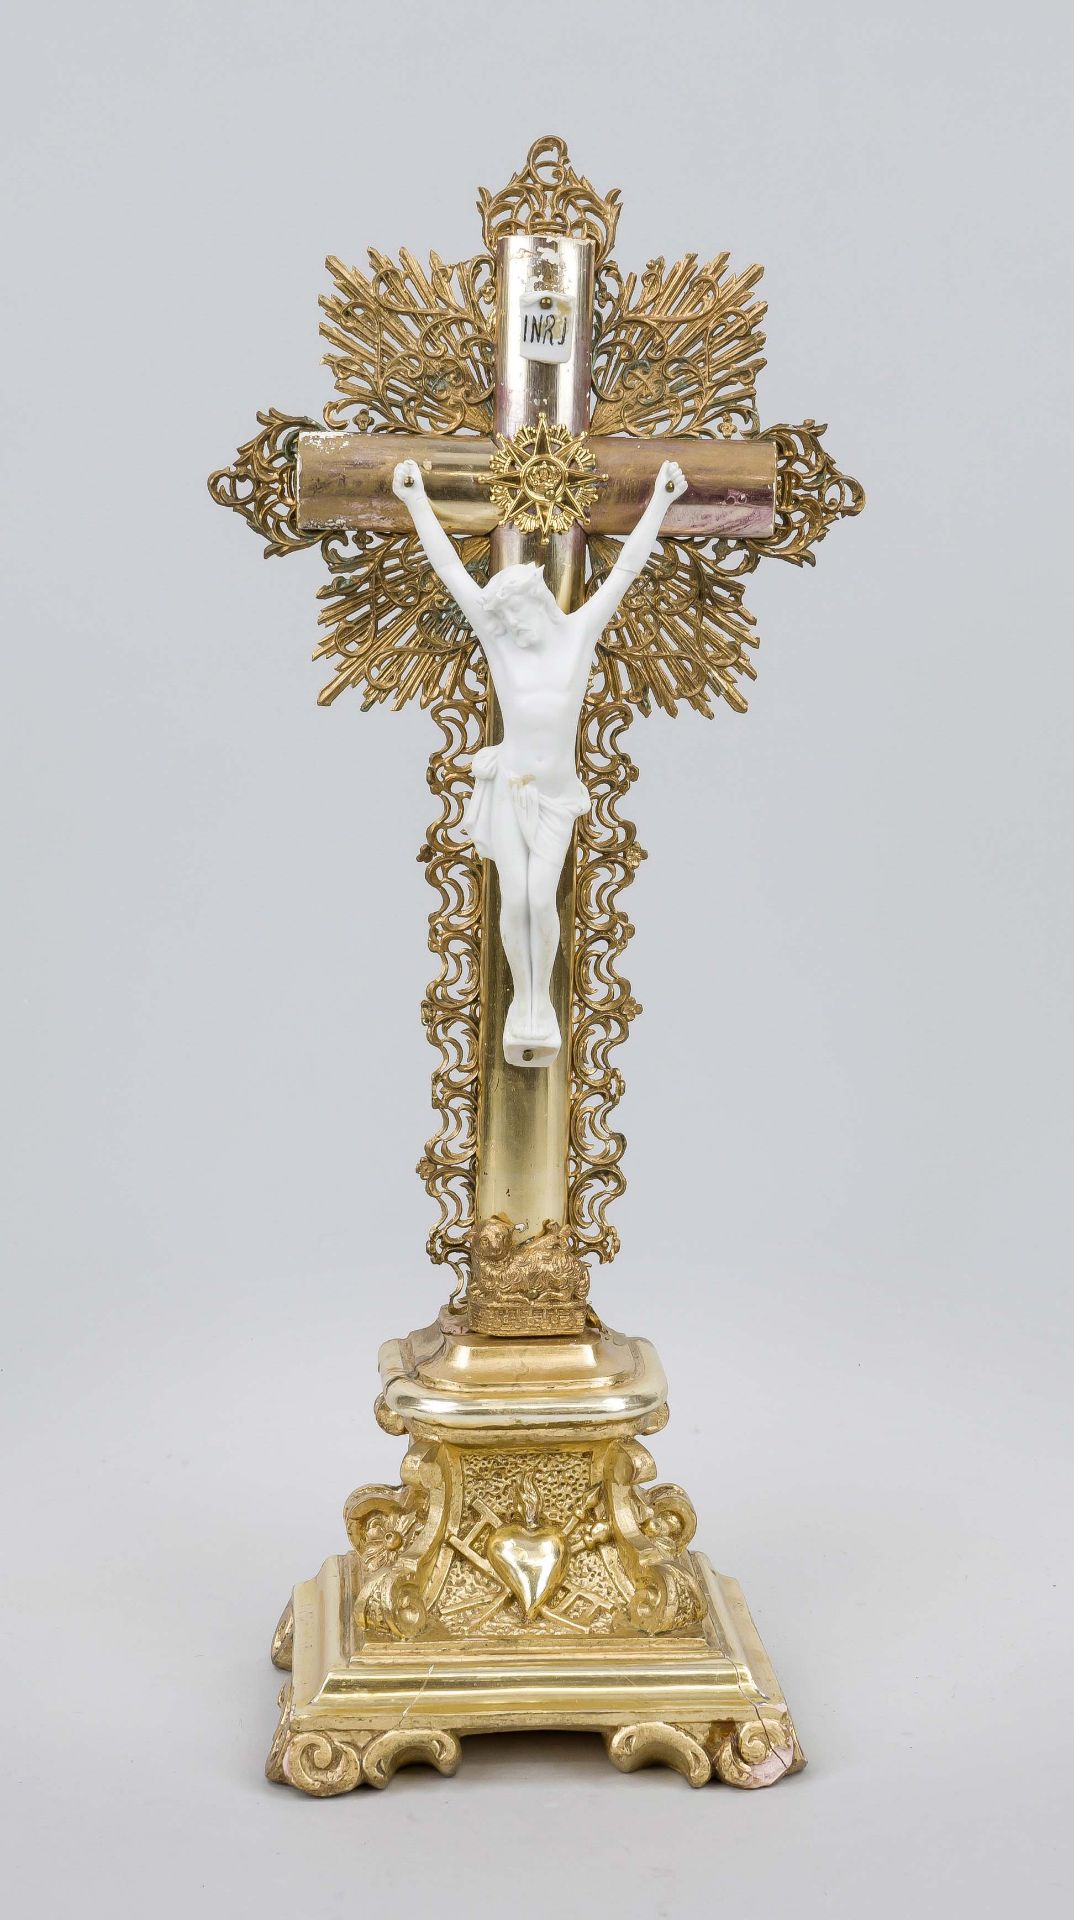 Christ on the cross, late 19th century, bisque porcelain figure of Christ on a wooden cross on an